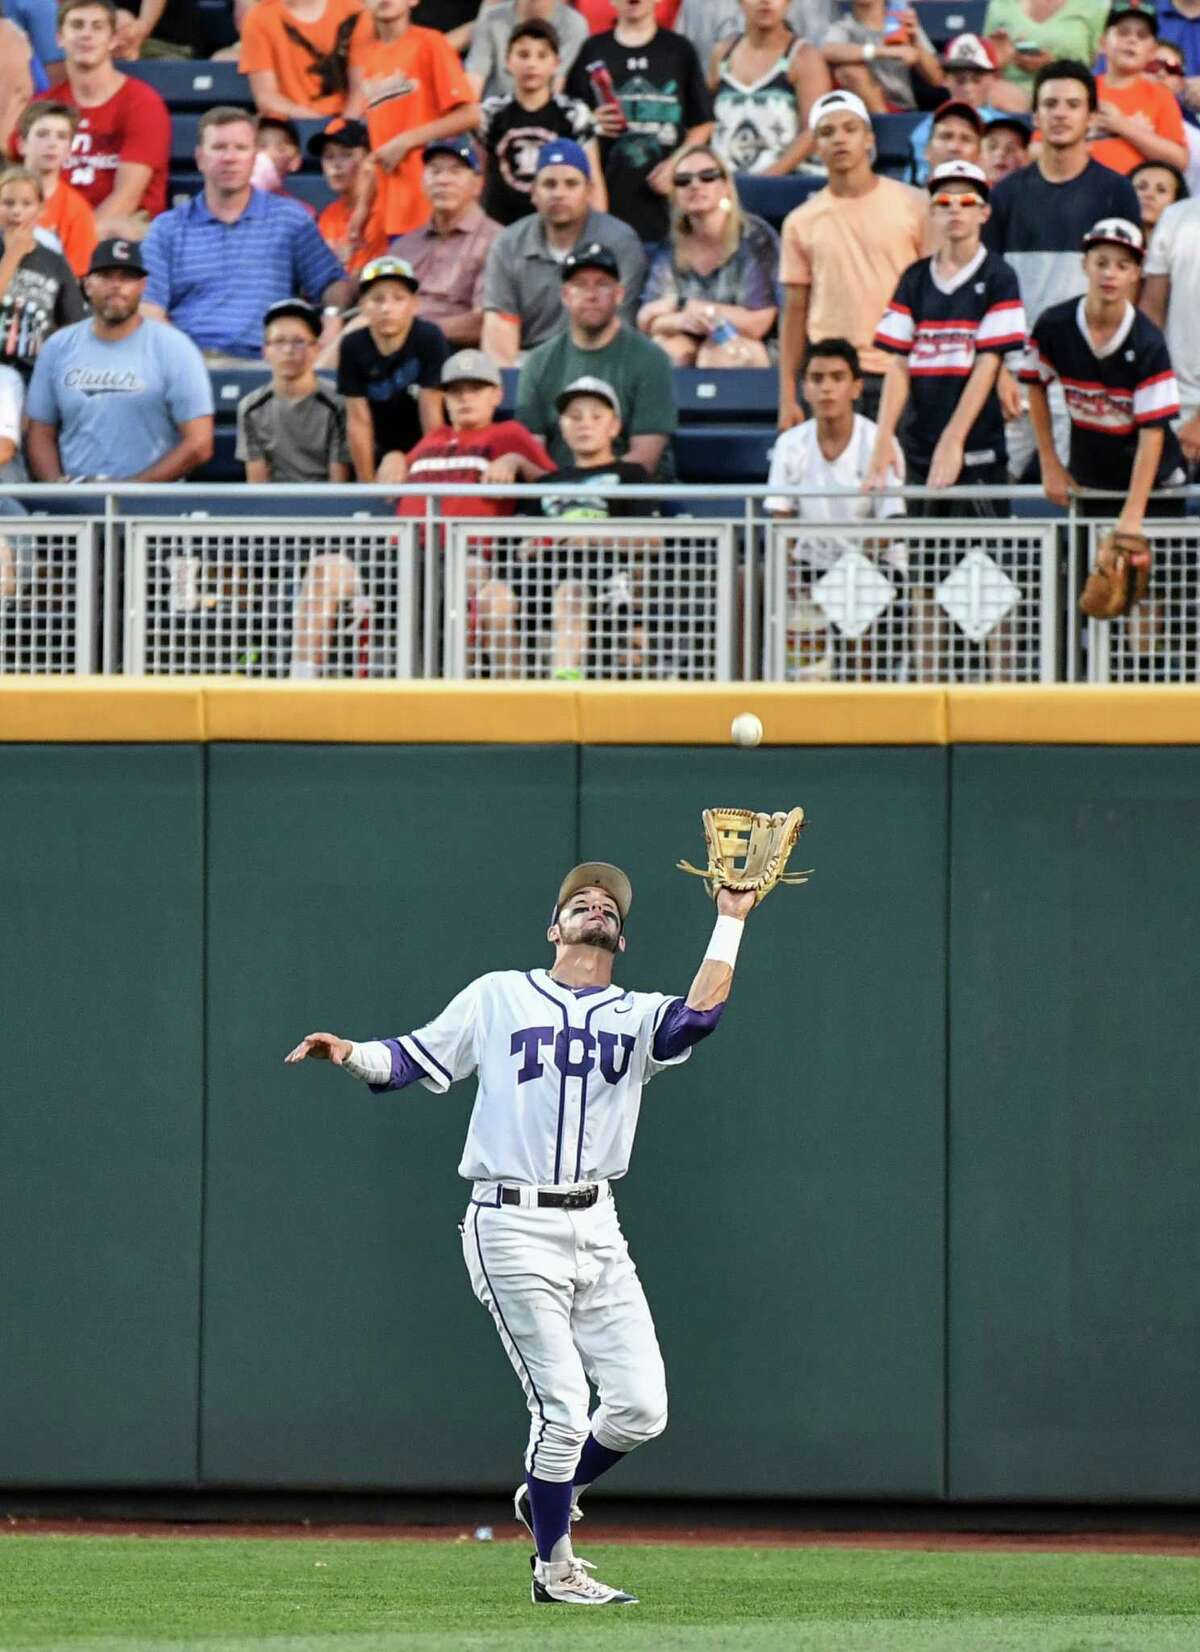 TCU center fielder Dane Steinhagen catches a fly ball by Coastal Carolina's G.K. Young during the seventh inning of an NCAA College World Series baseball game in Omaha, Neb., Friday, June 24, 2016. (AP Photo/Ted Kirk)